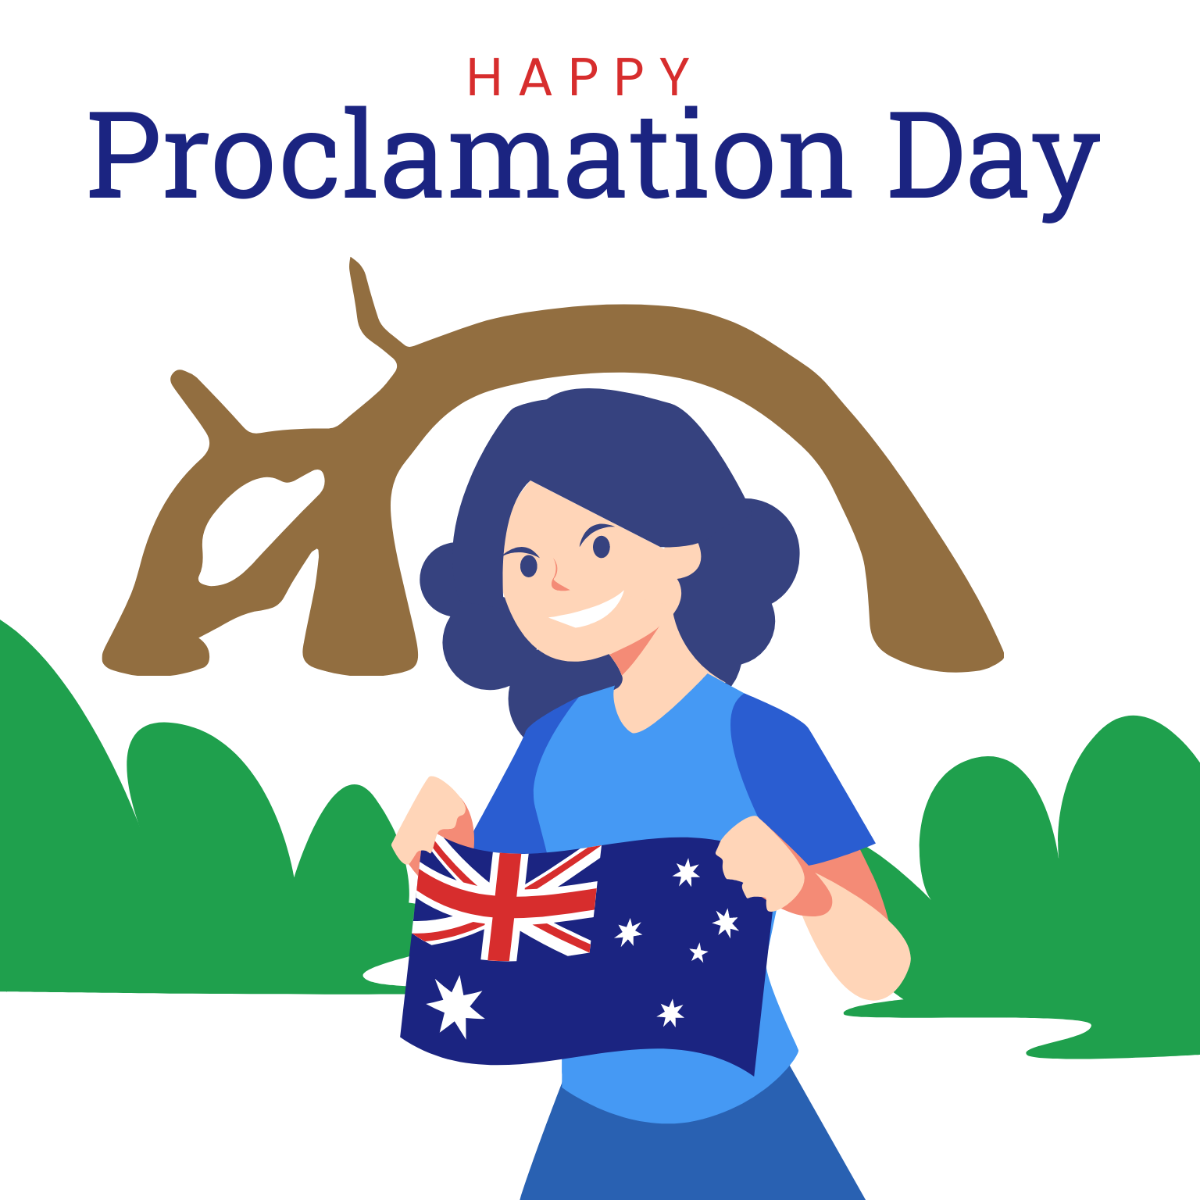 Happy Proclamation Day Illustration Template